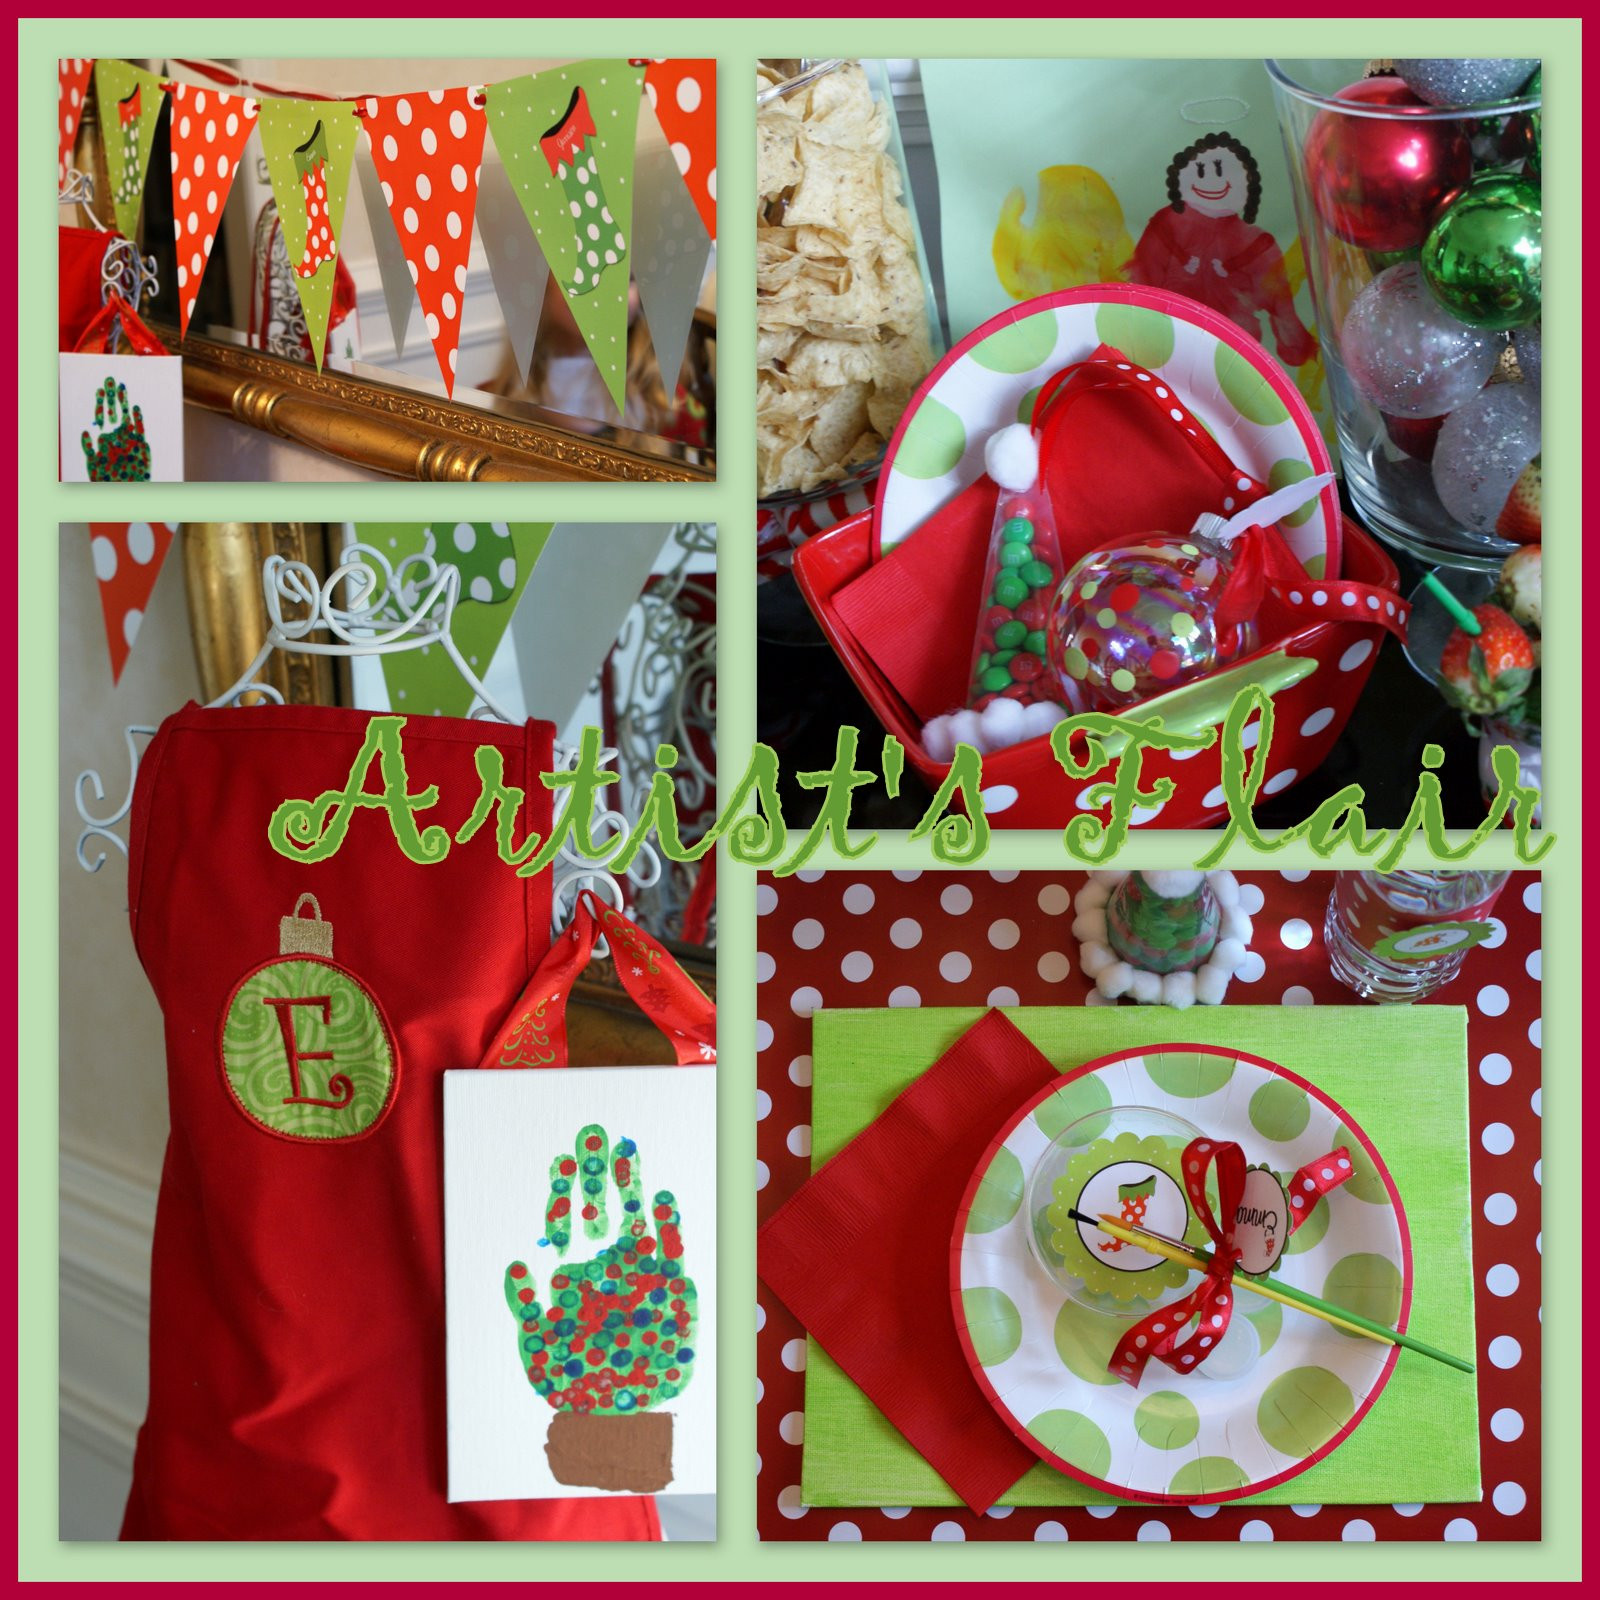 School Christmas Party Ideas
 A Little Loveliness Christmas P art y